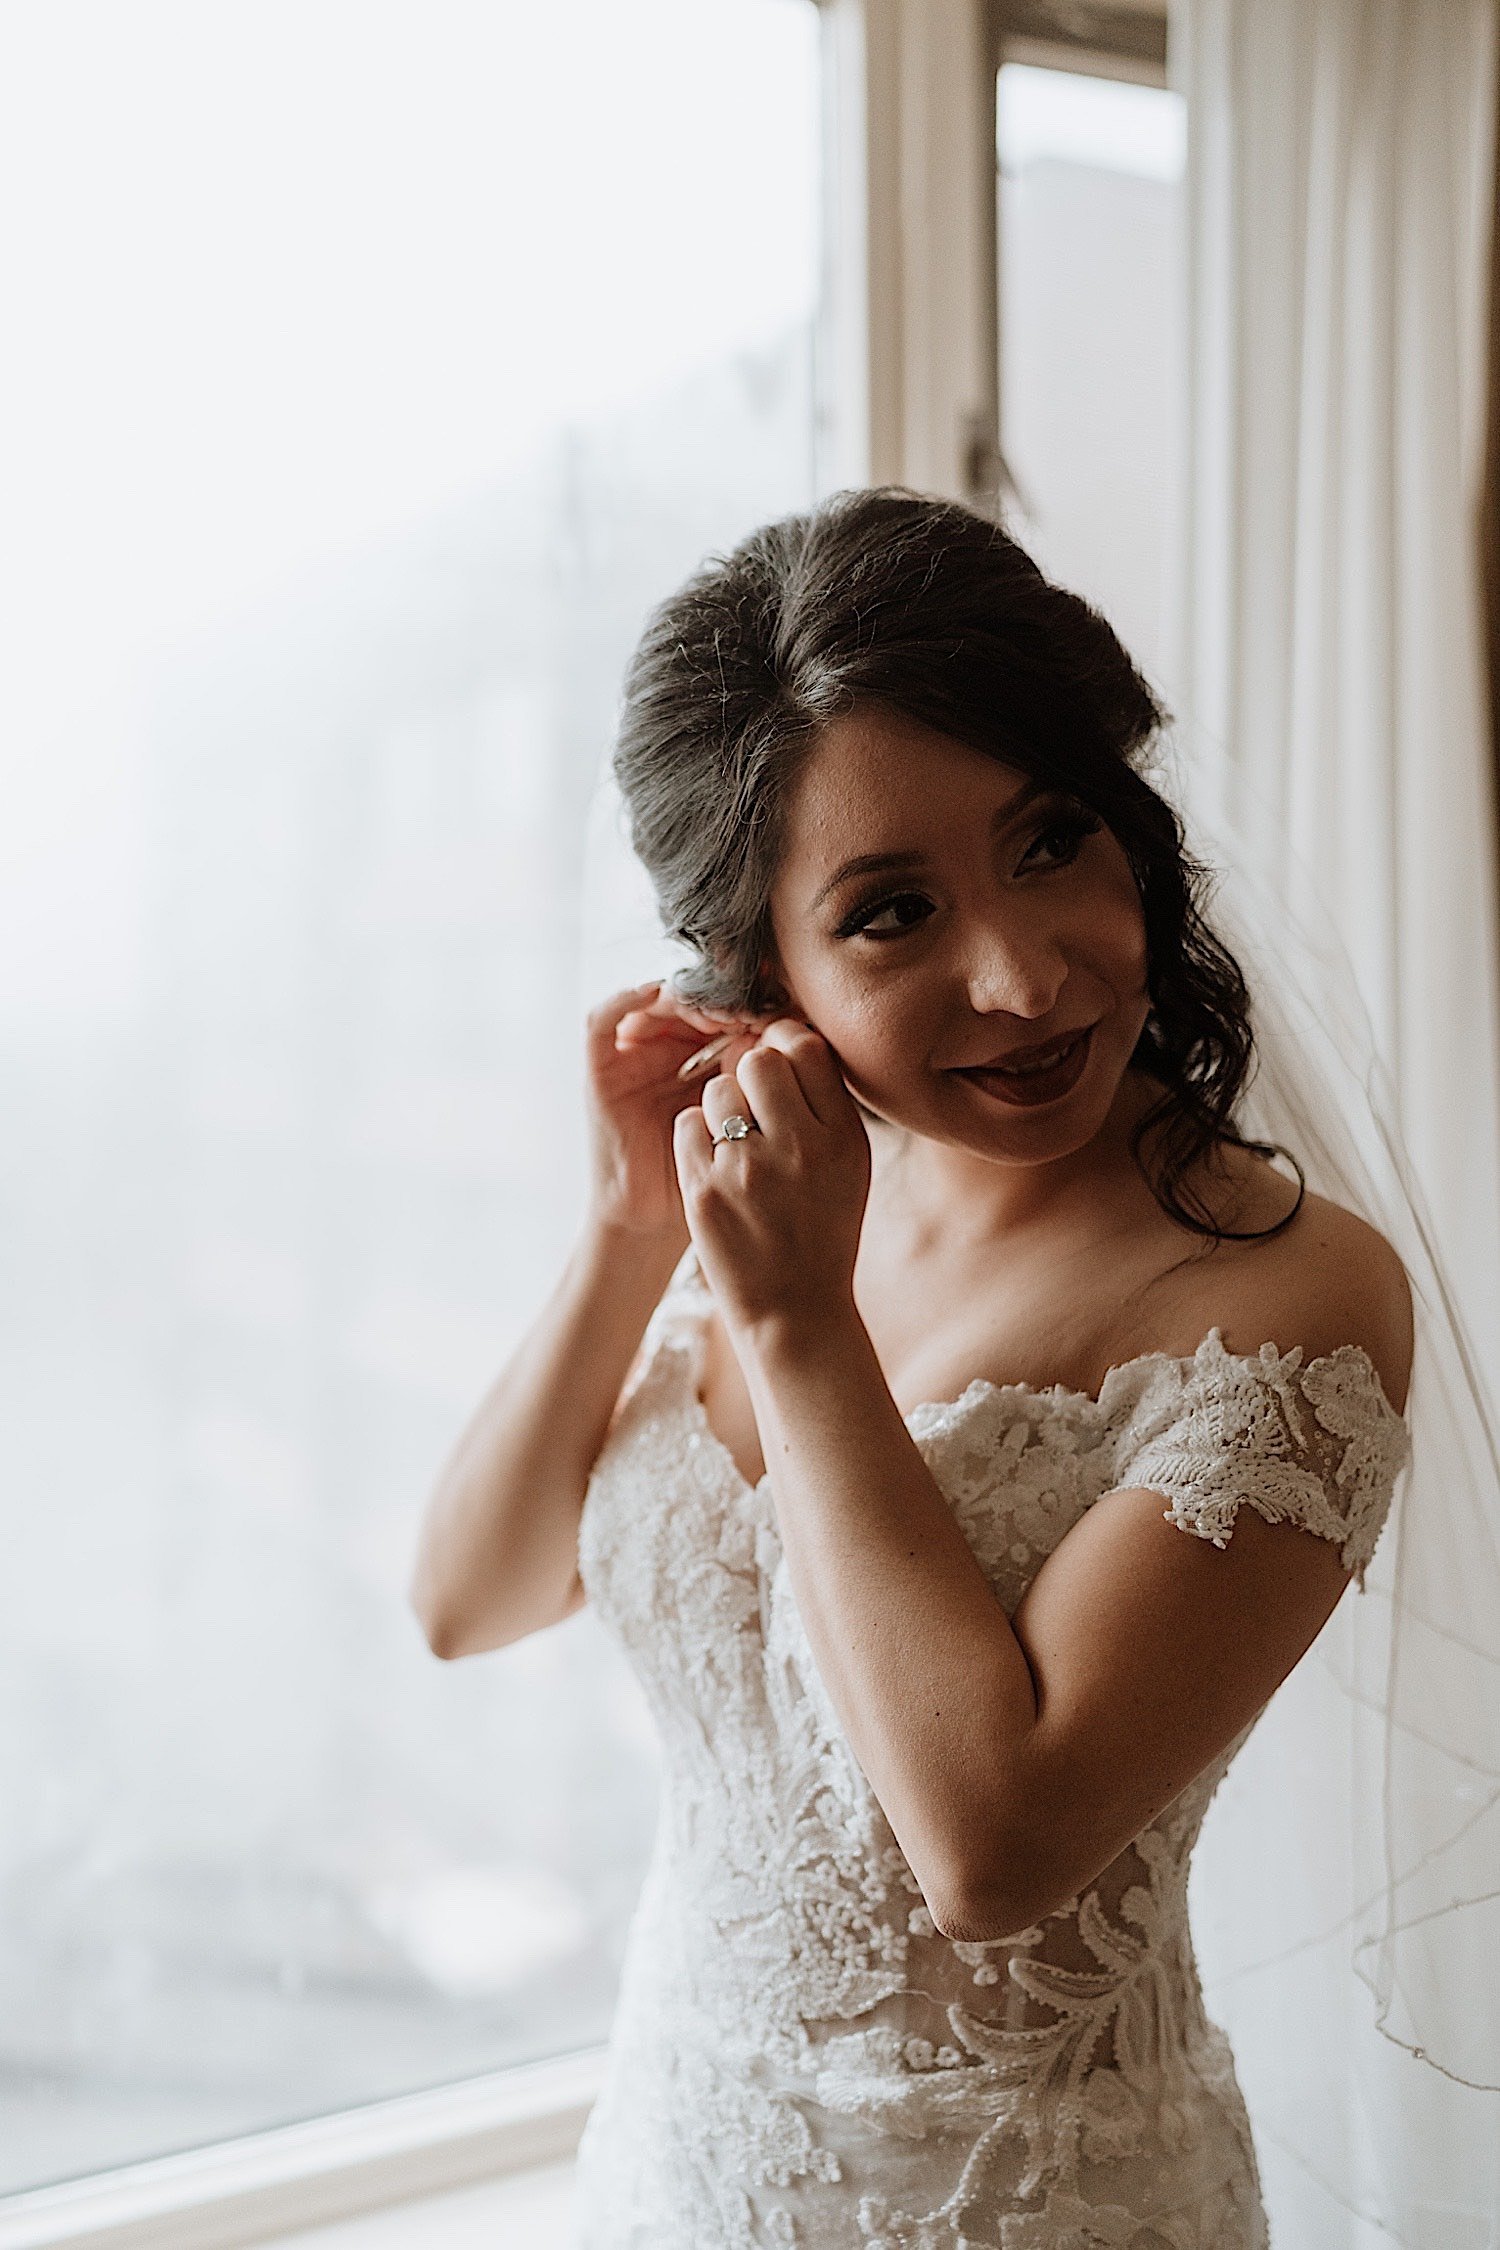 Bride putting on an earing while in her wedding dress in front of a window